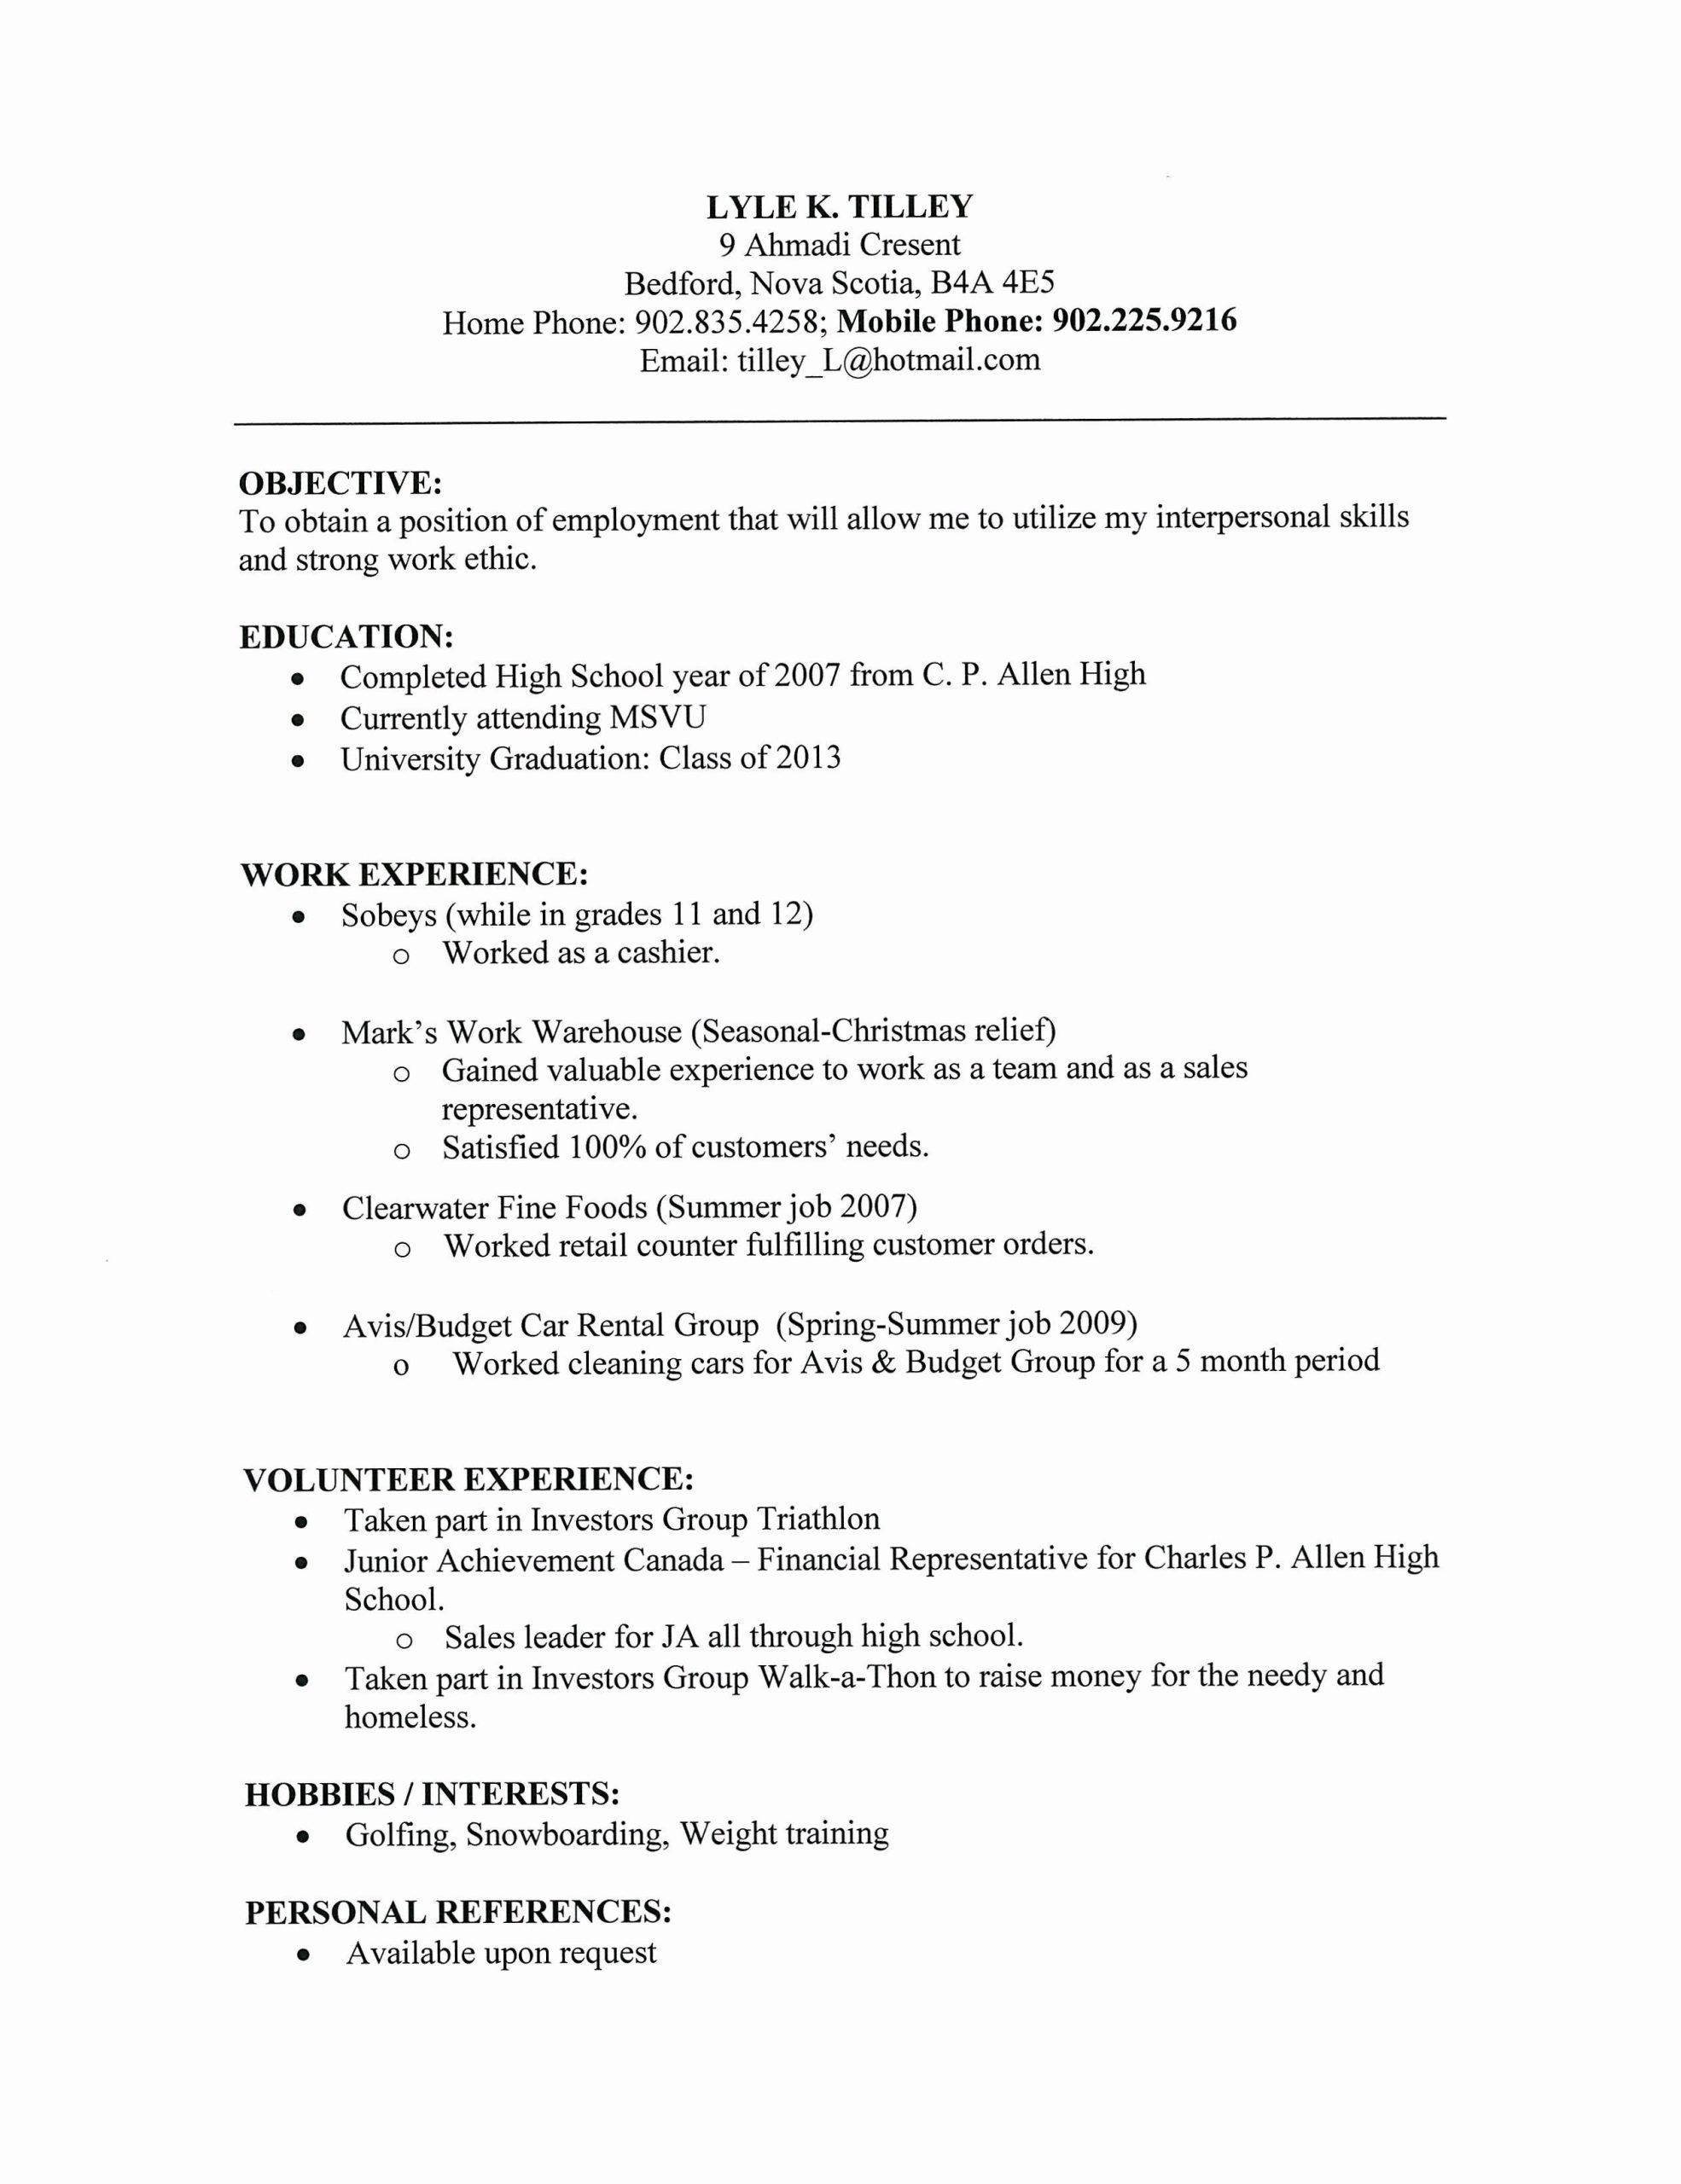 Sample Resume for Highschool Students with Volunteer Experience Pin On Resume Templates